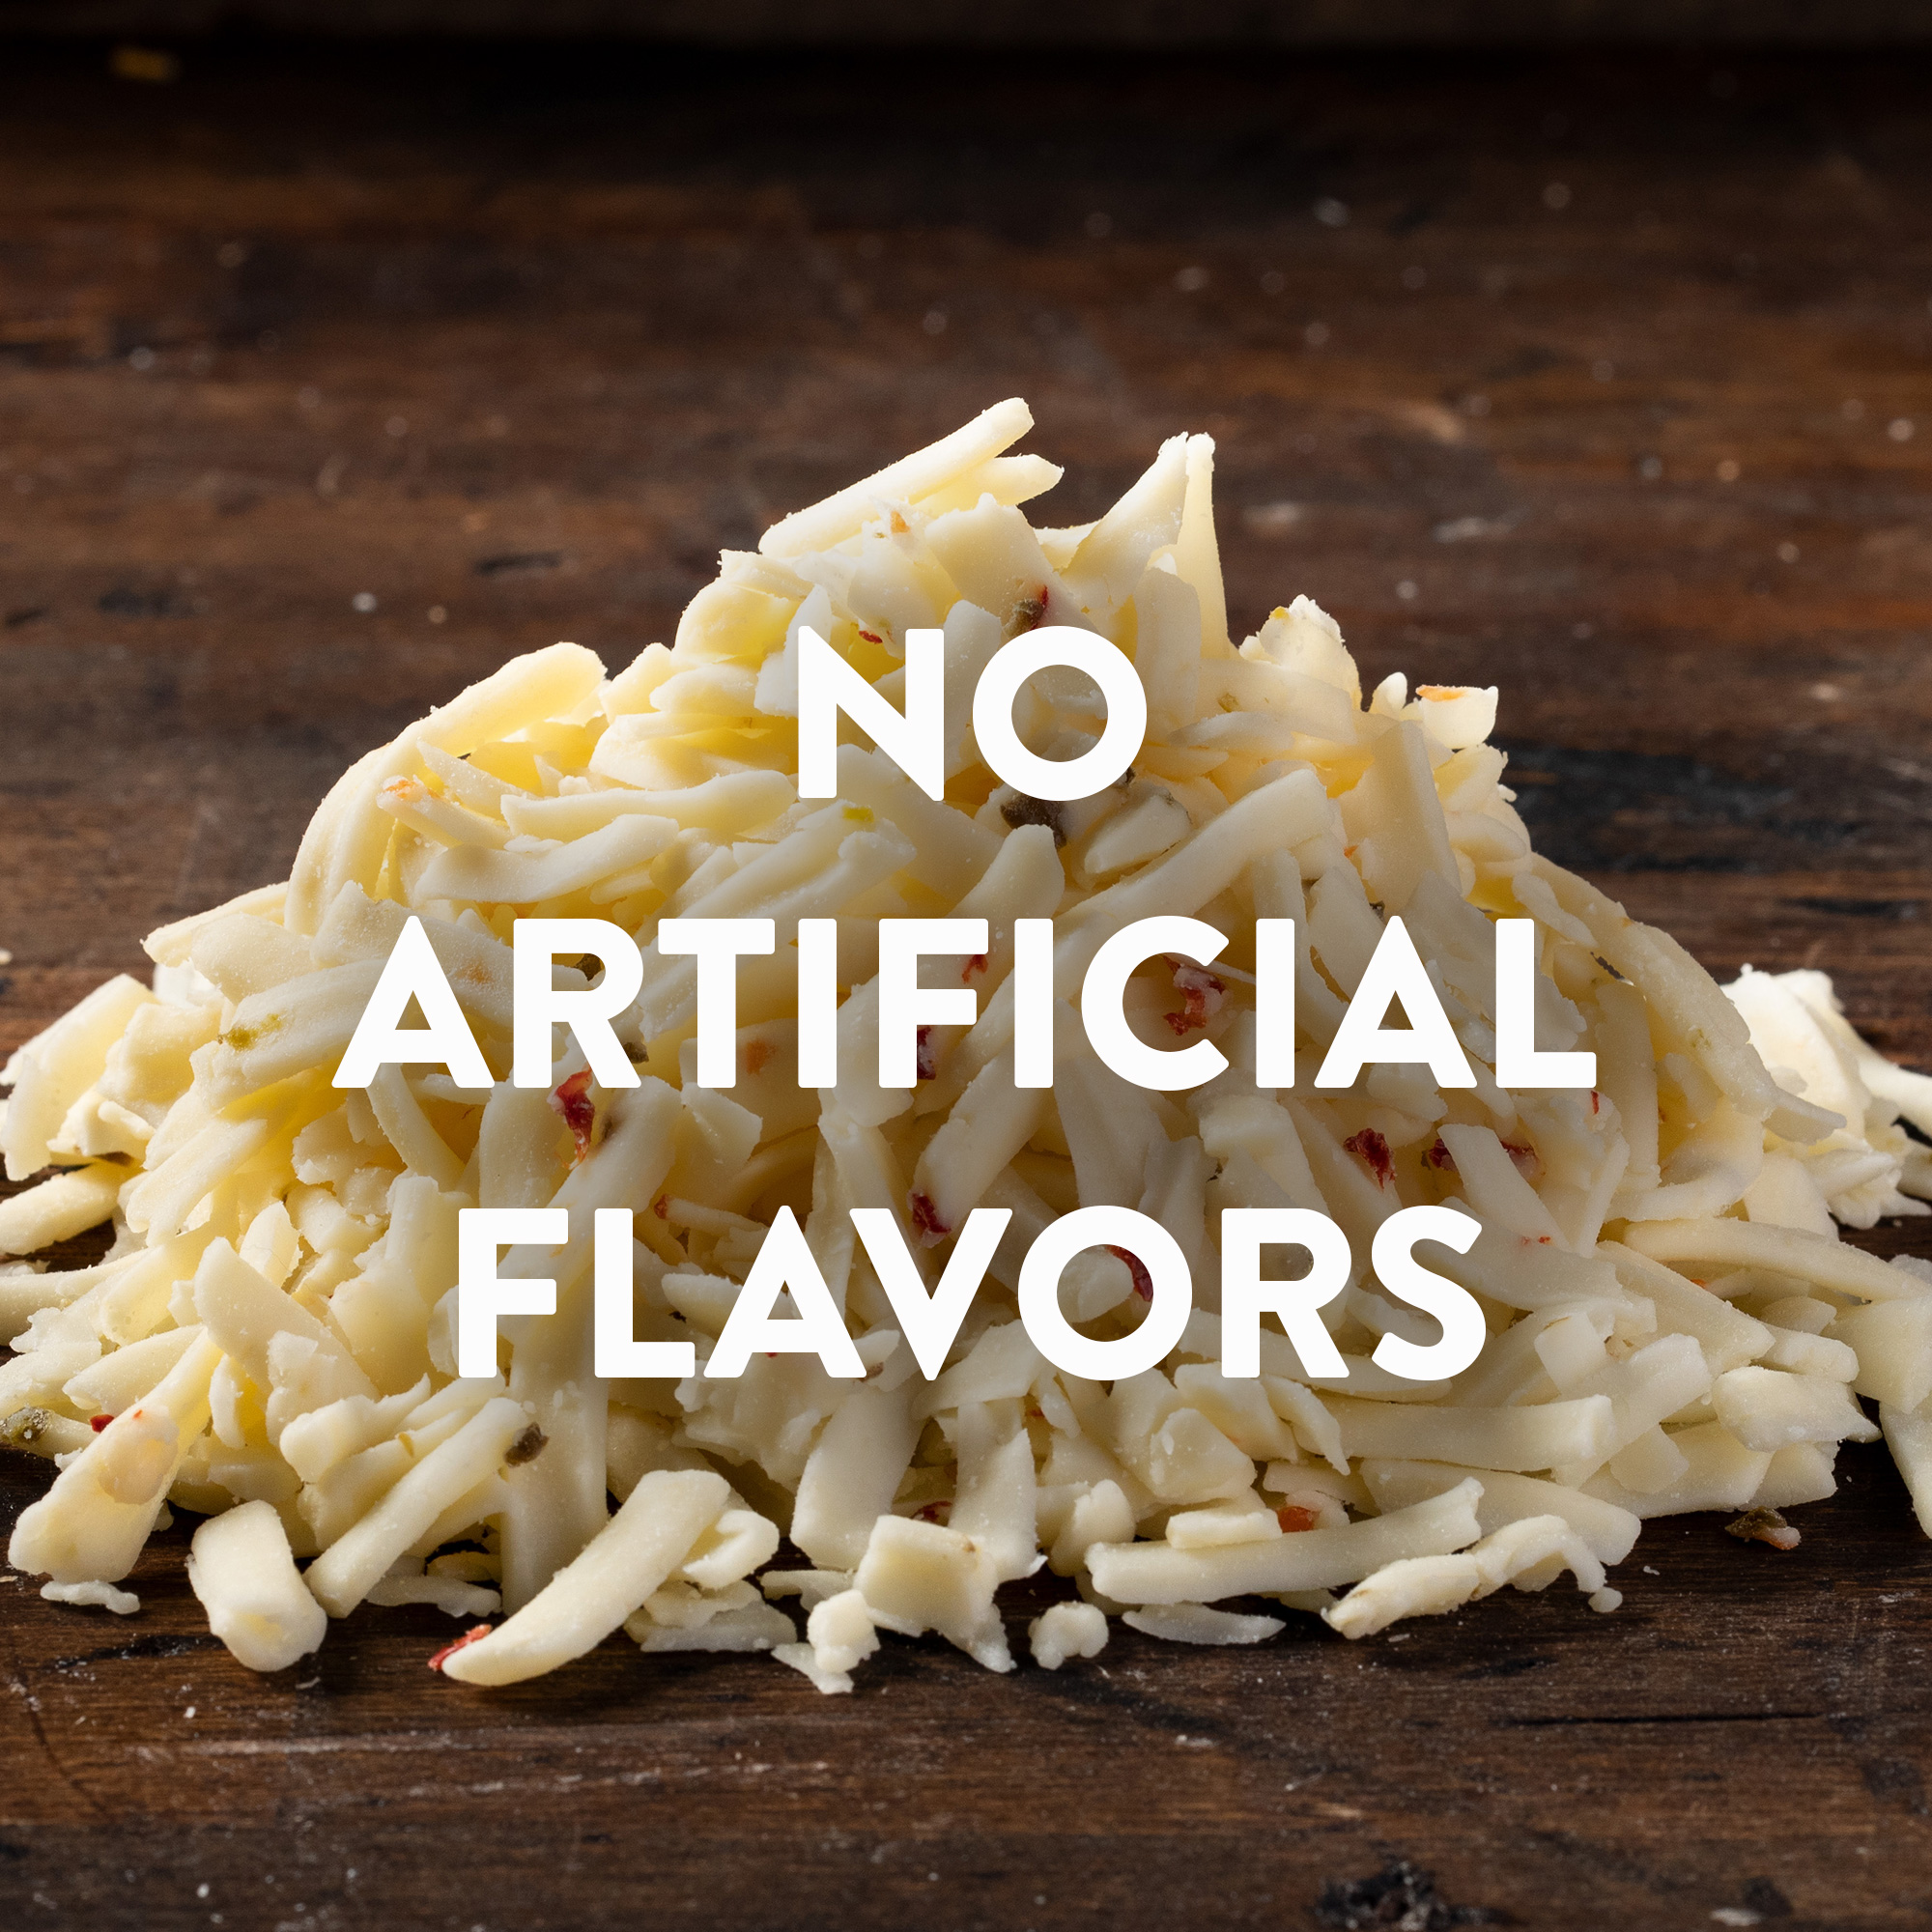 Sargento® Shredded Pepper Jack Natural Cheese